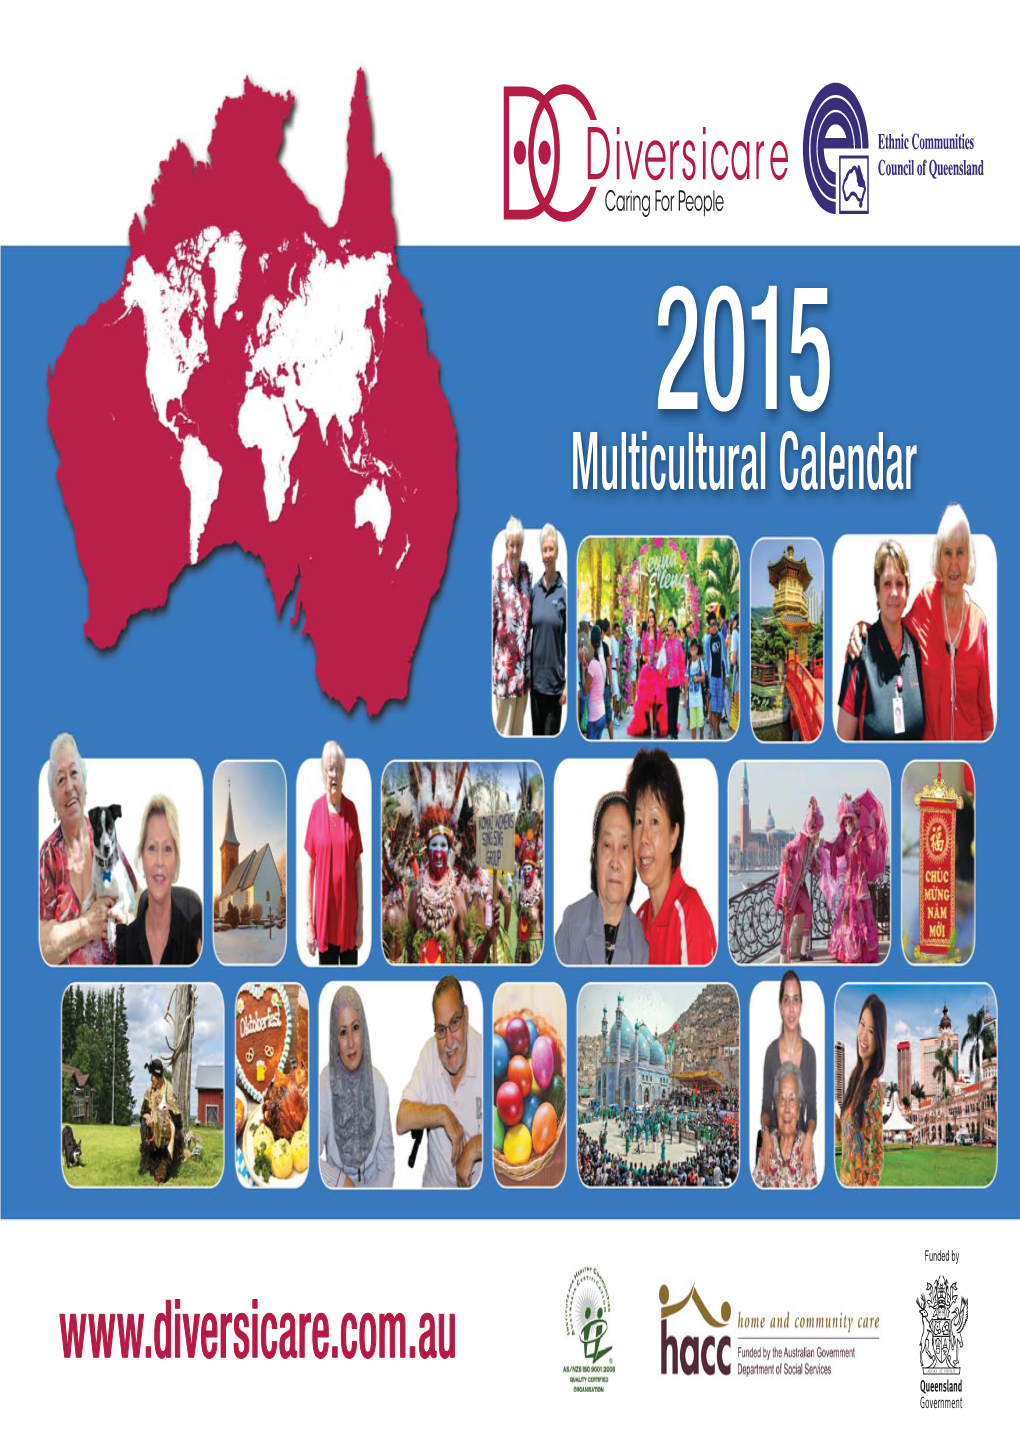 2015 DIVERSICARE CALENDAR Carnevale Is Generally Considered a Festive Time for Children, Similar to Halloween